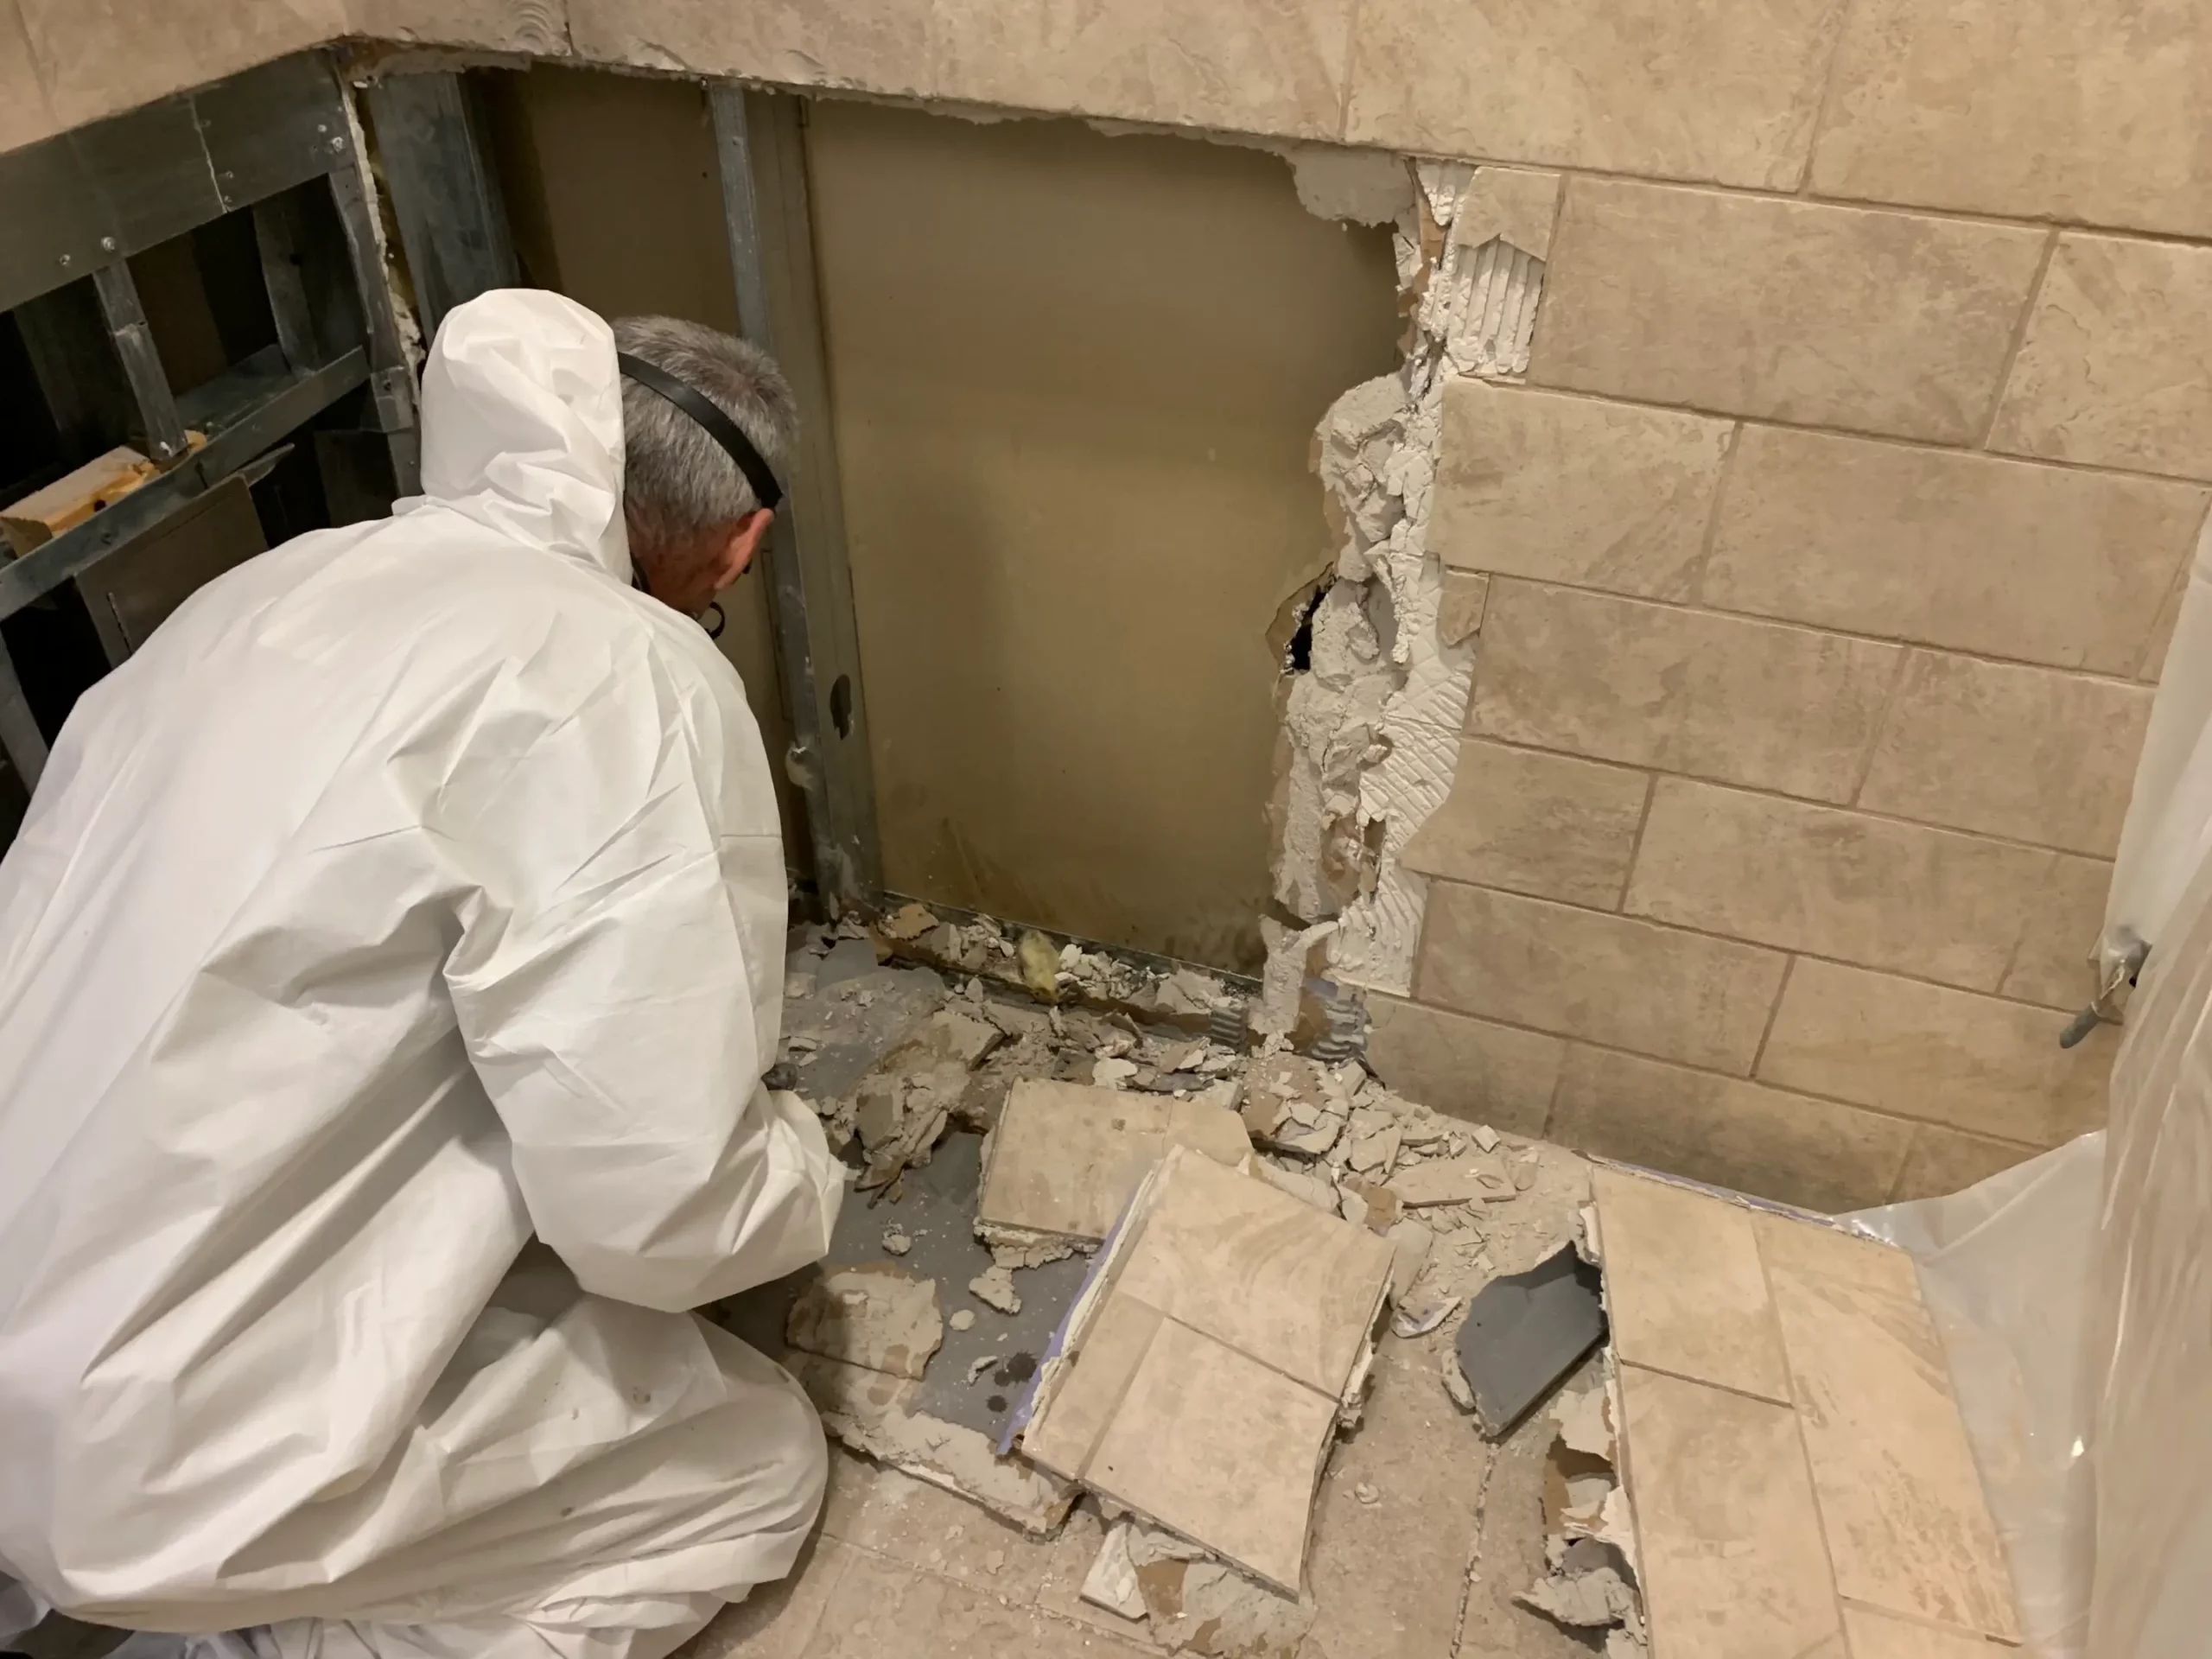 mold removal, mold remediation, mold growth, mold spores, west chester pa, mold testing, mold damage, remediation process, mold removal services, mold issue, health risks, black mold, excess moisture, hvac system, restoration, business